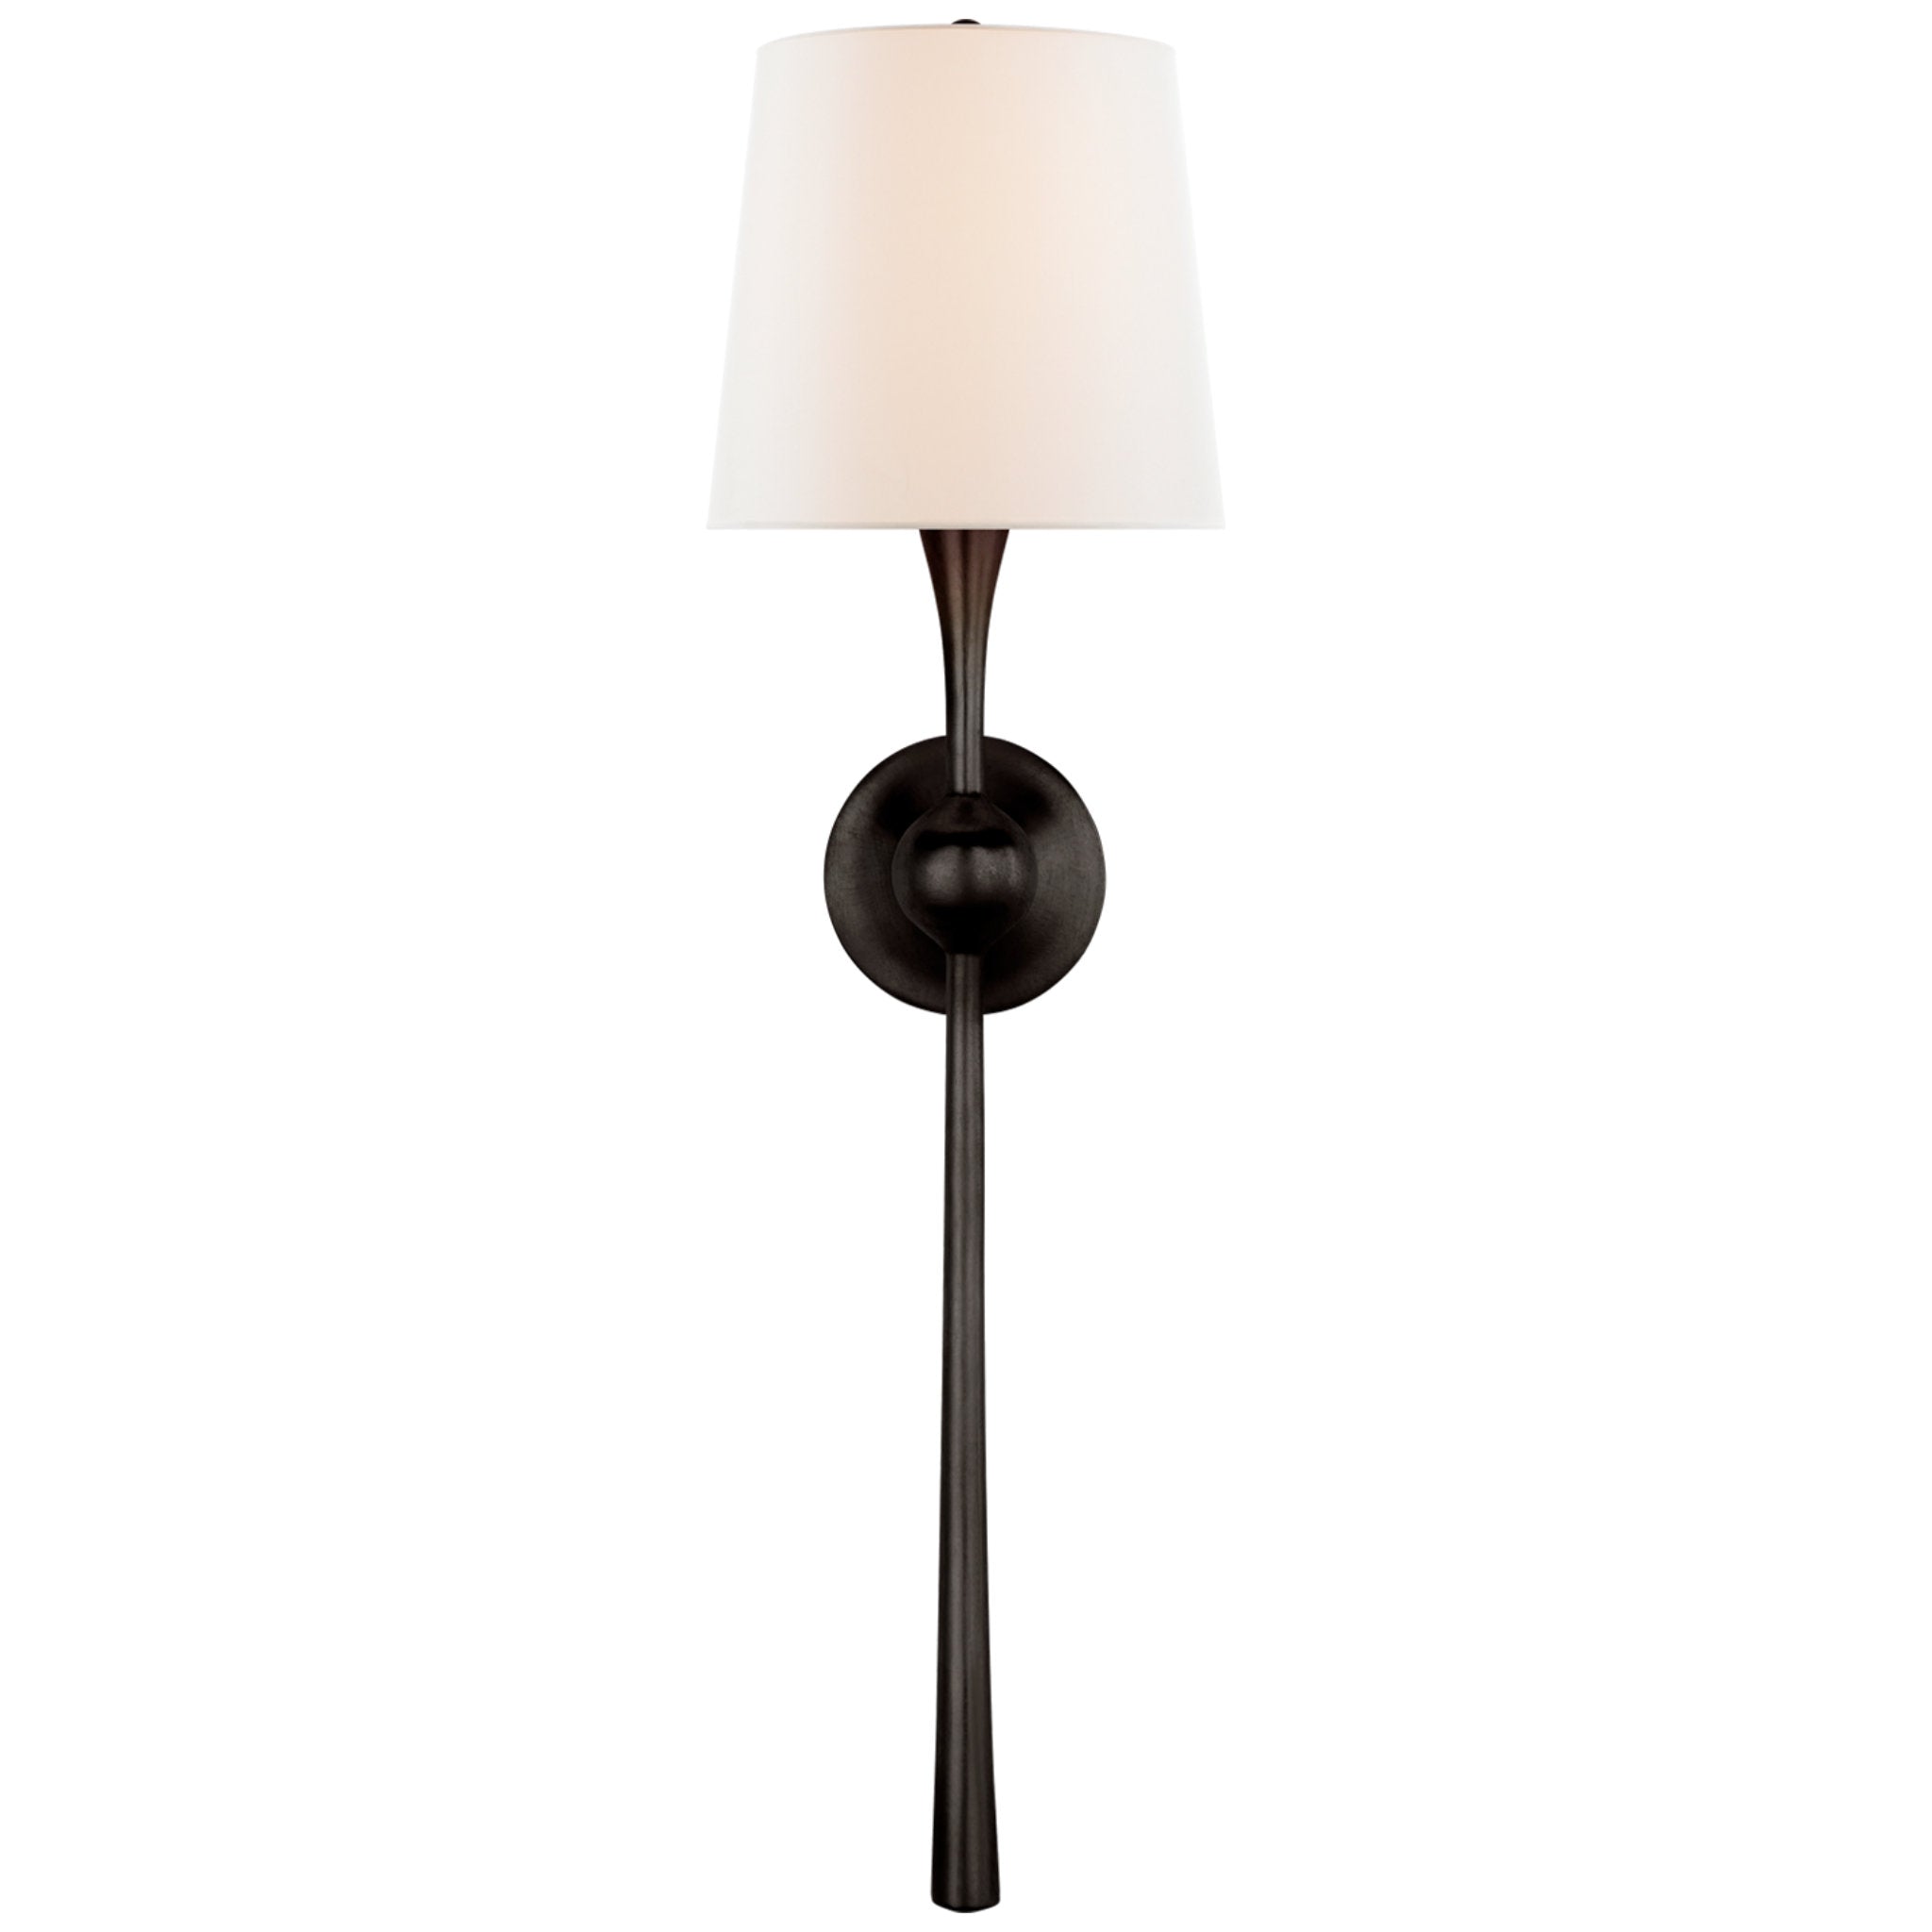 AERIN Dover Large Tail Sconce in Aged Iron with Linen Shade